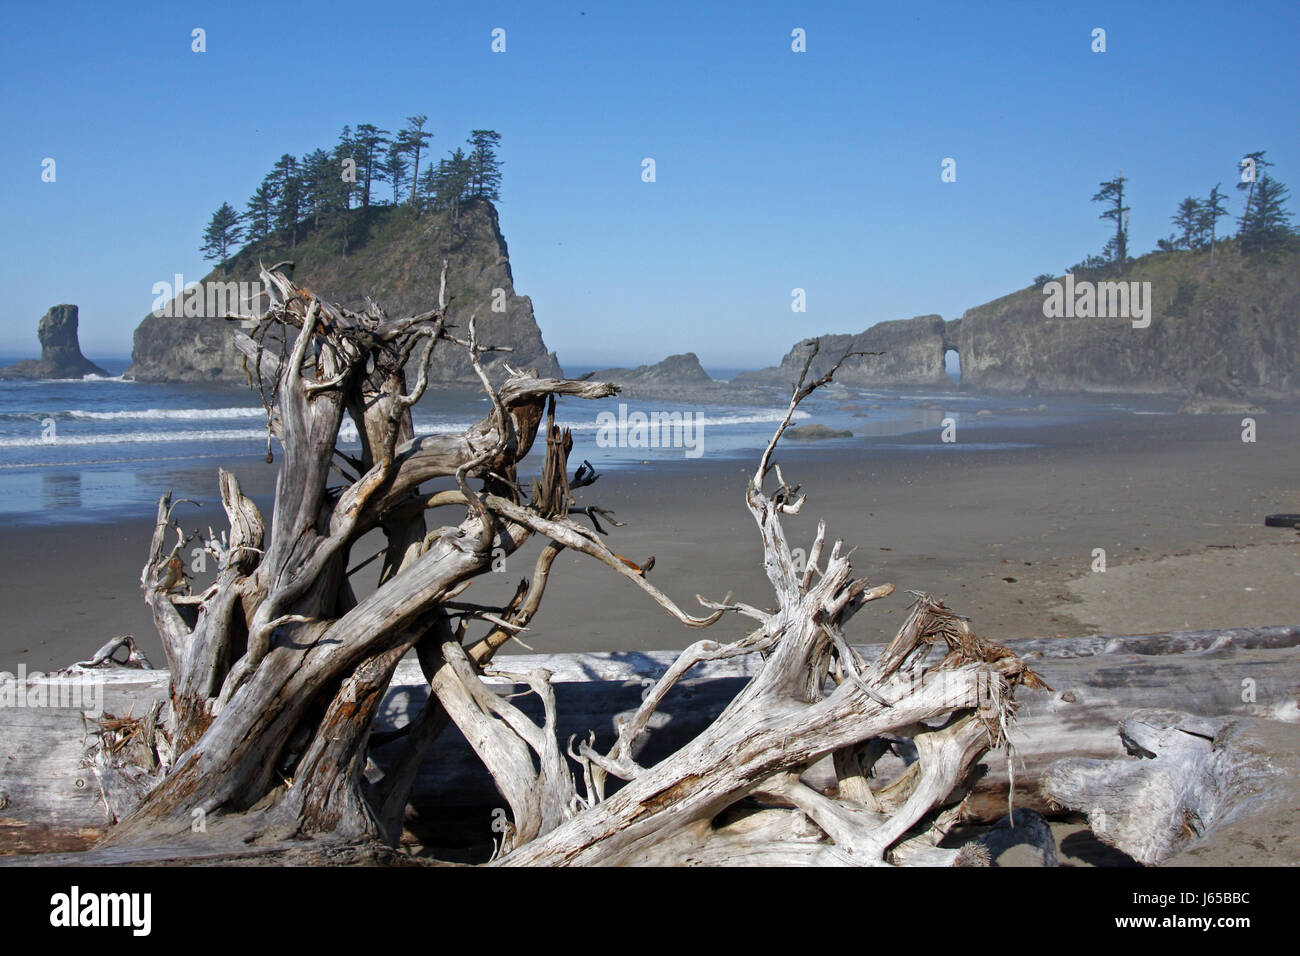 Olympic National Park Banque D'Images